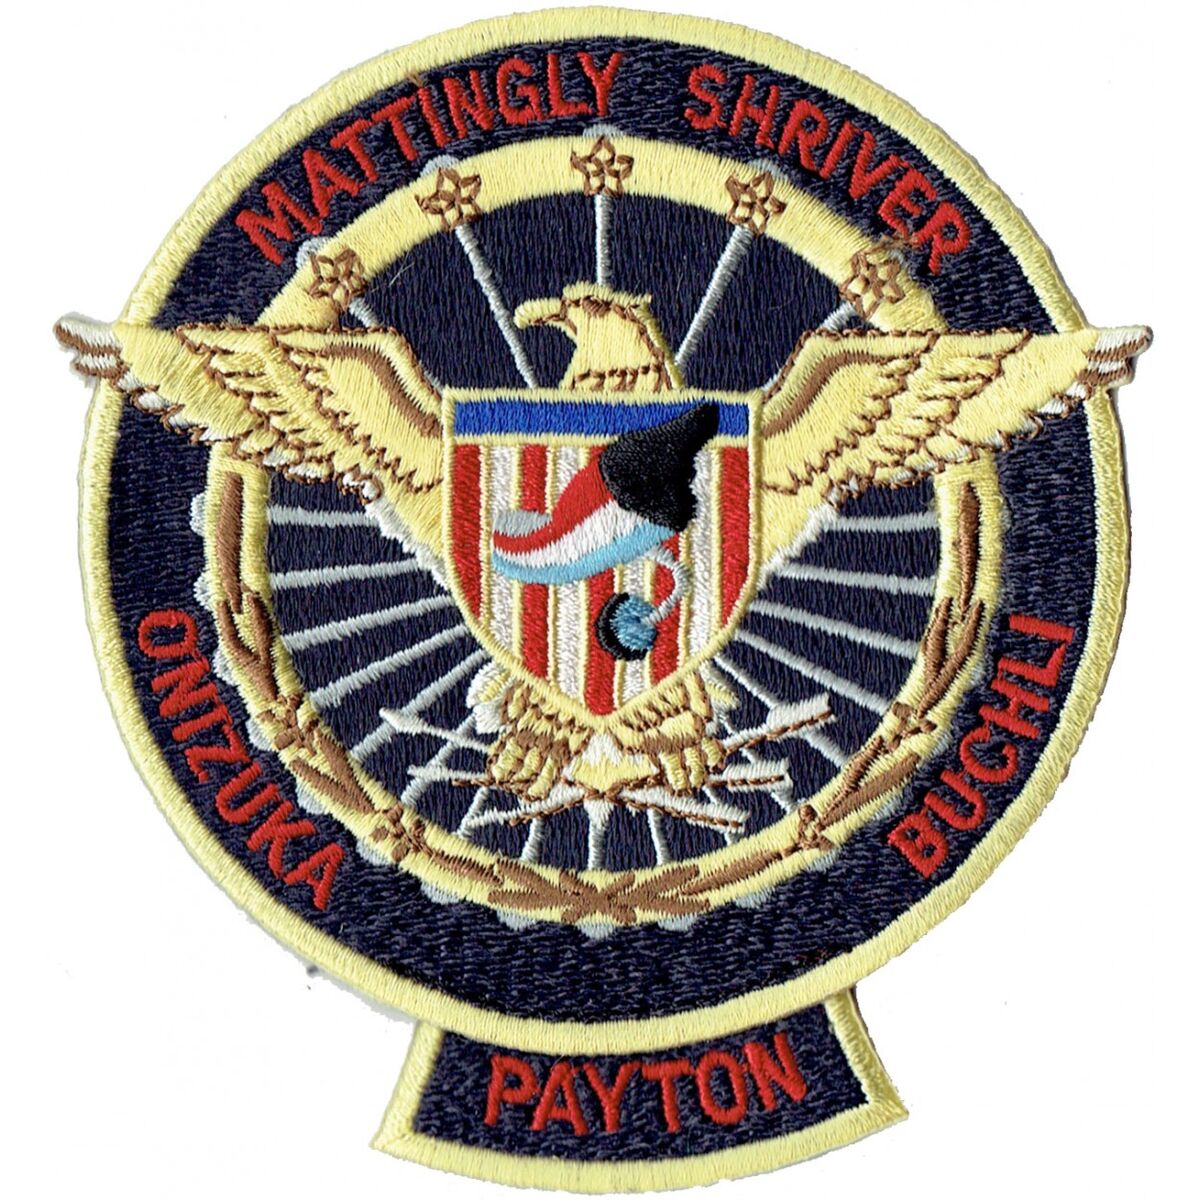 STS-51-C | Space Patches Wiki | Fandom